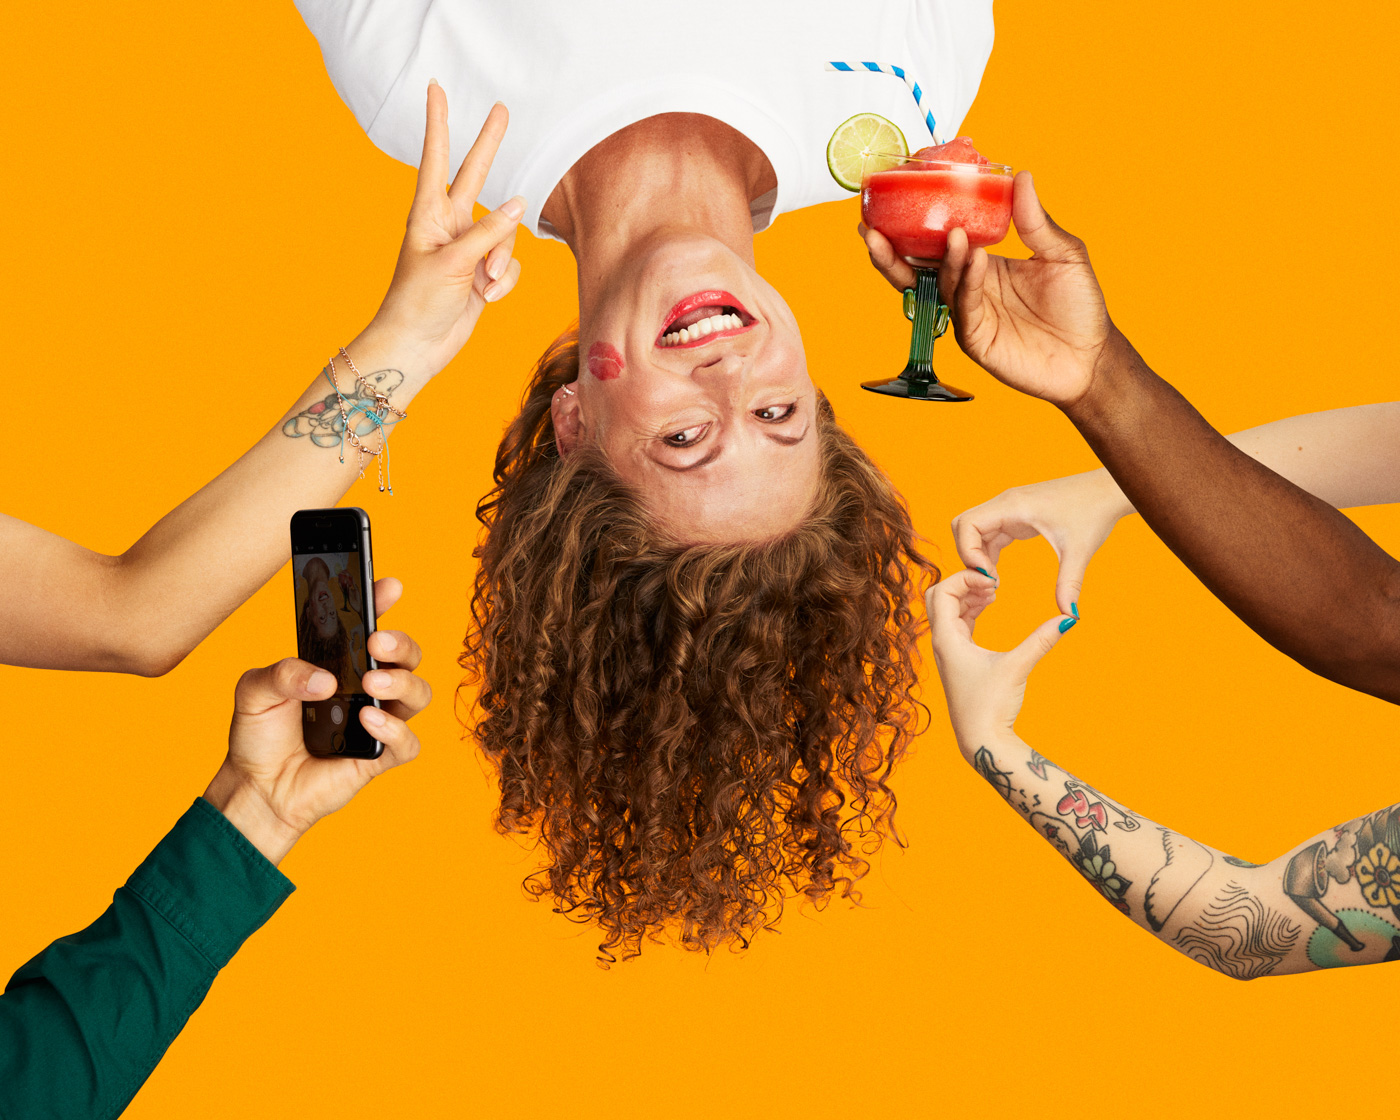 Woman_hanging_upside_down_being_offered_cocktails_and_peace_sign_on_yellow_background_by_Tapio_Ranta-aho